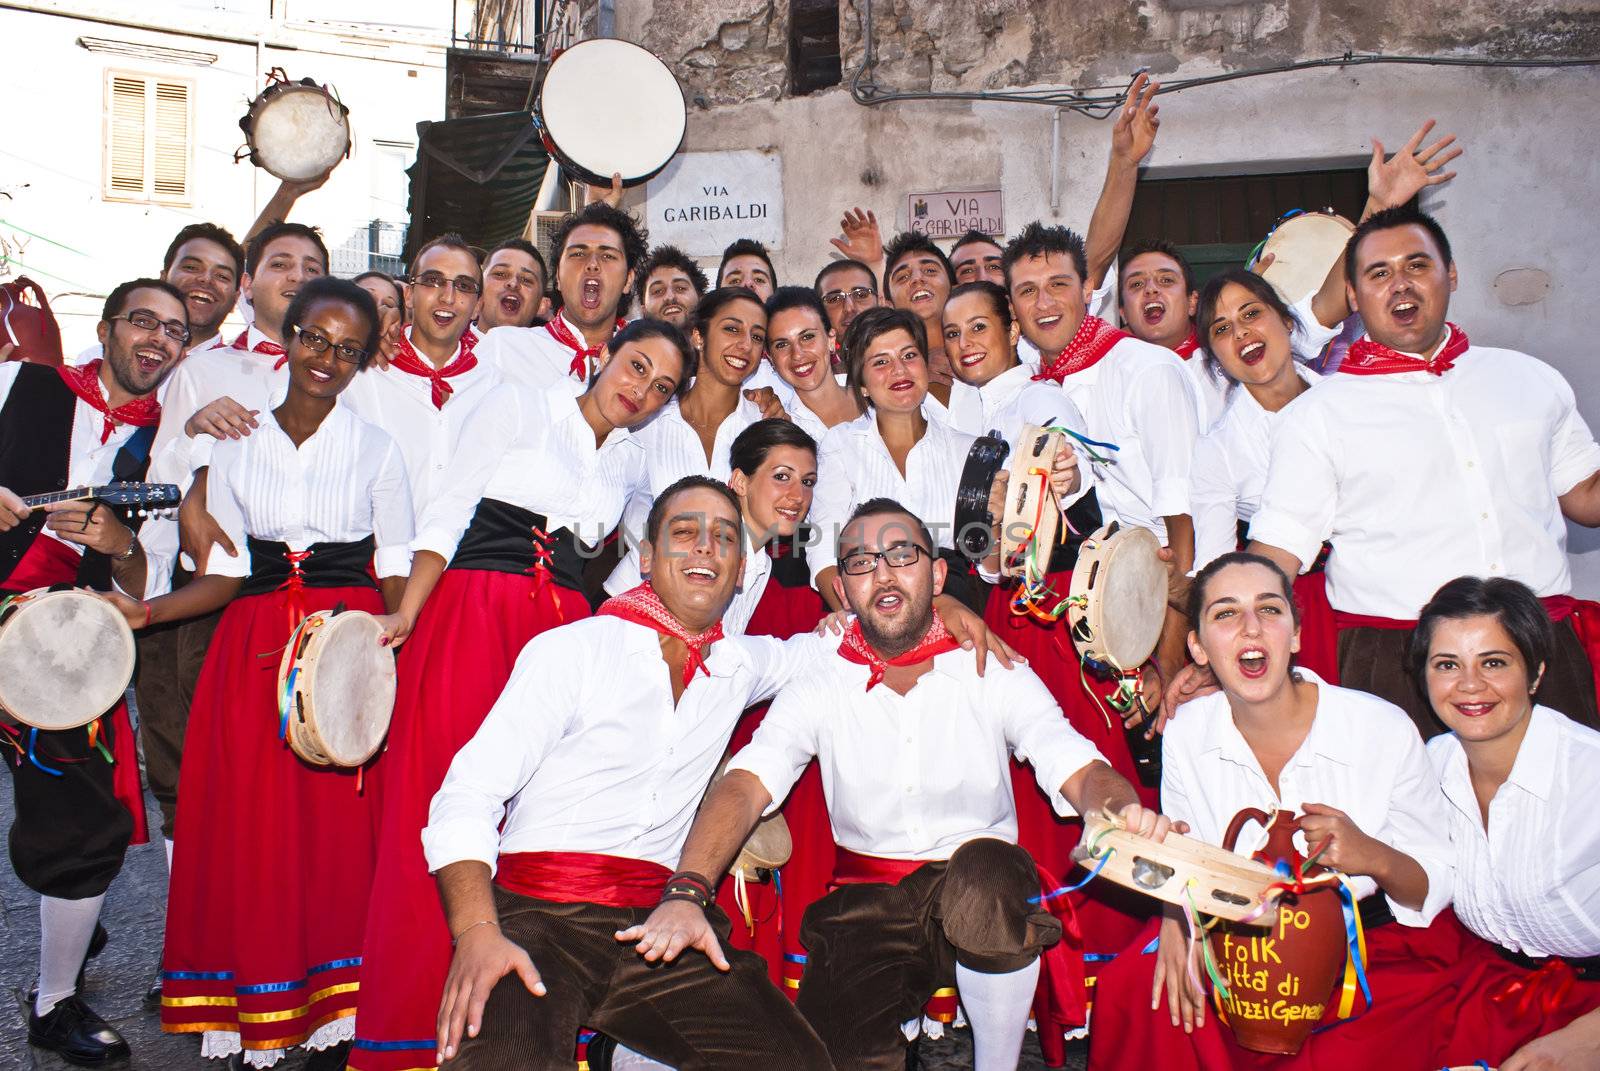 POLIZZI GENEROSA, SICILY - AUGUST 21: Sicilian folk group from Polizzi G. at the International "Festival of hazelnuts",dance and parade through the city: August 21, 2011 in Polizzi Generosa,Sicily, Italy